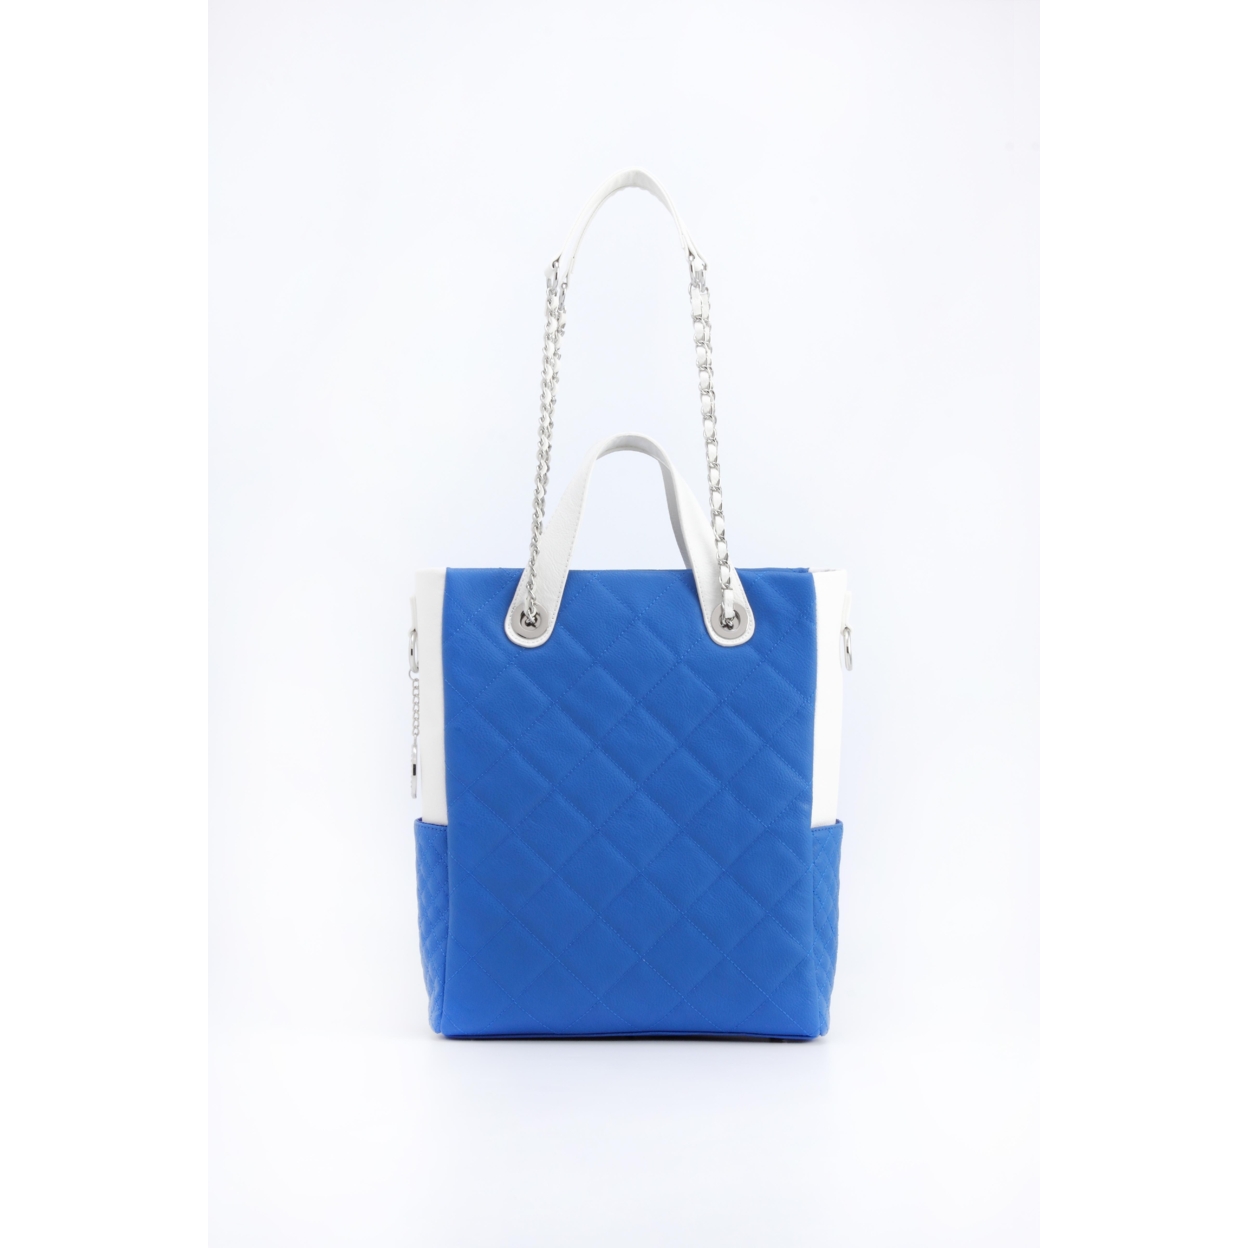 SCORE!'s Kat Travel Tote For Business, Work, Or School Quilted Shoulder Bag - Imperial Royal Blue And White